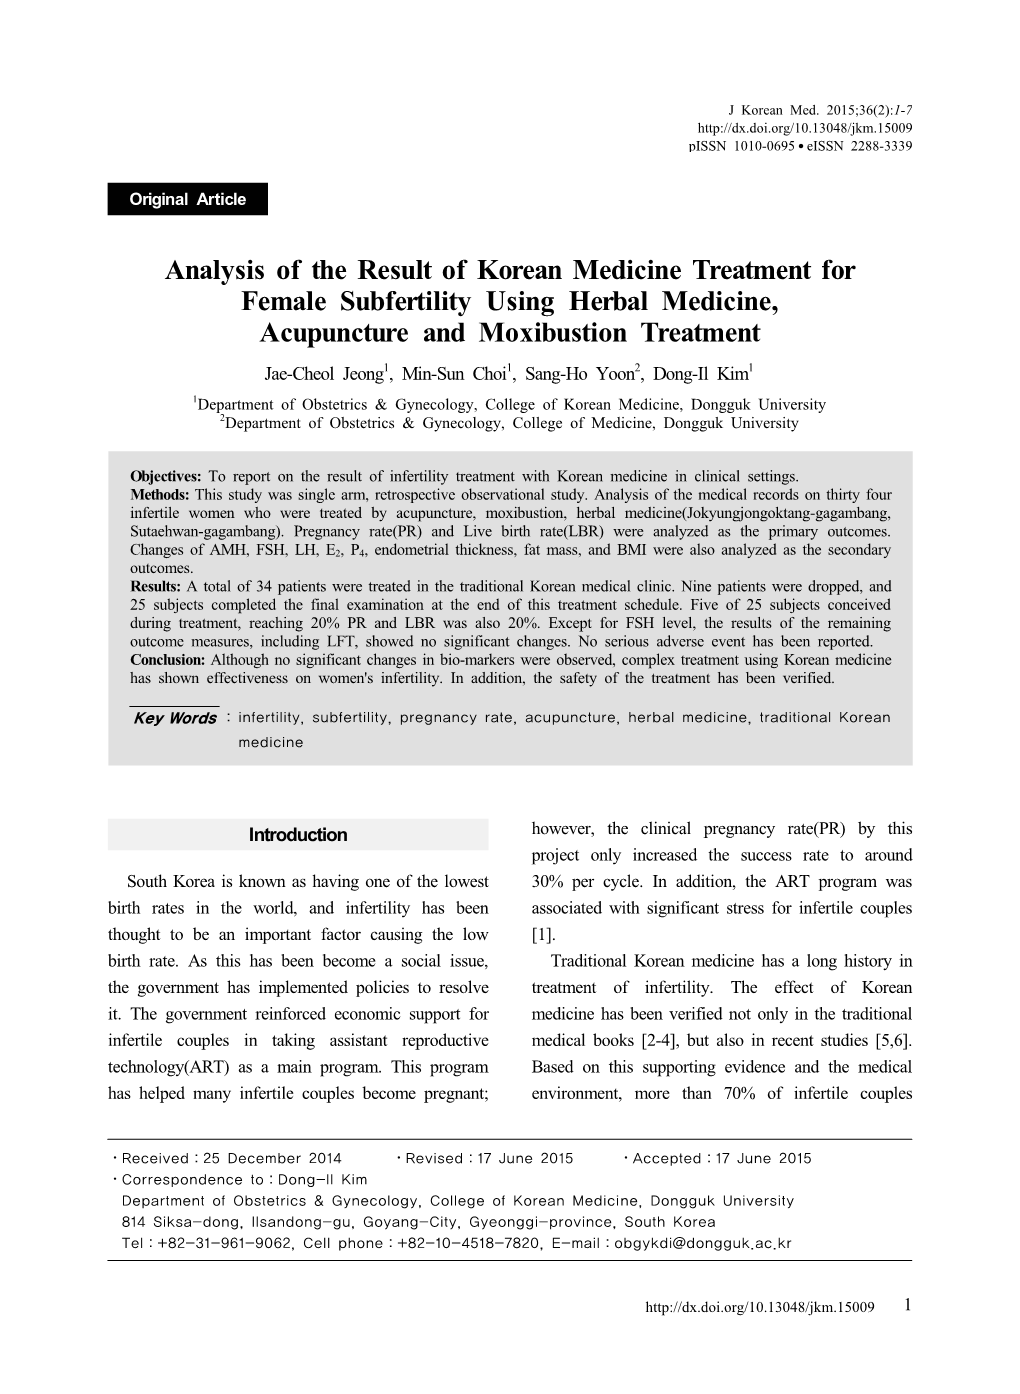 Analysis of the Result of Korean Medicine Treatment for Female